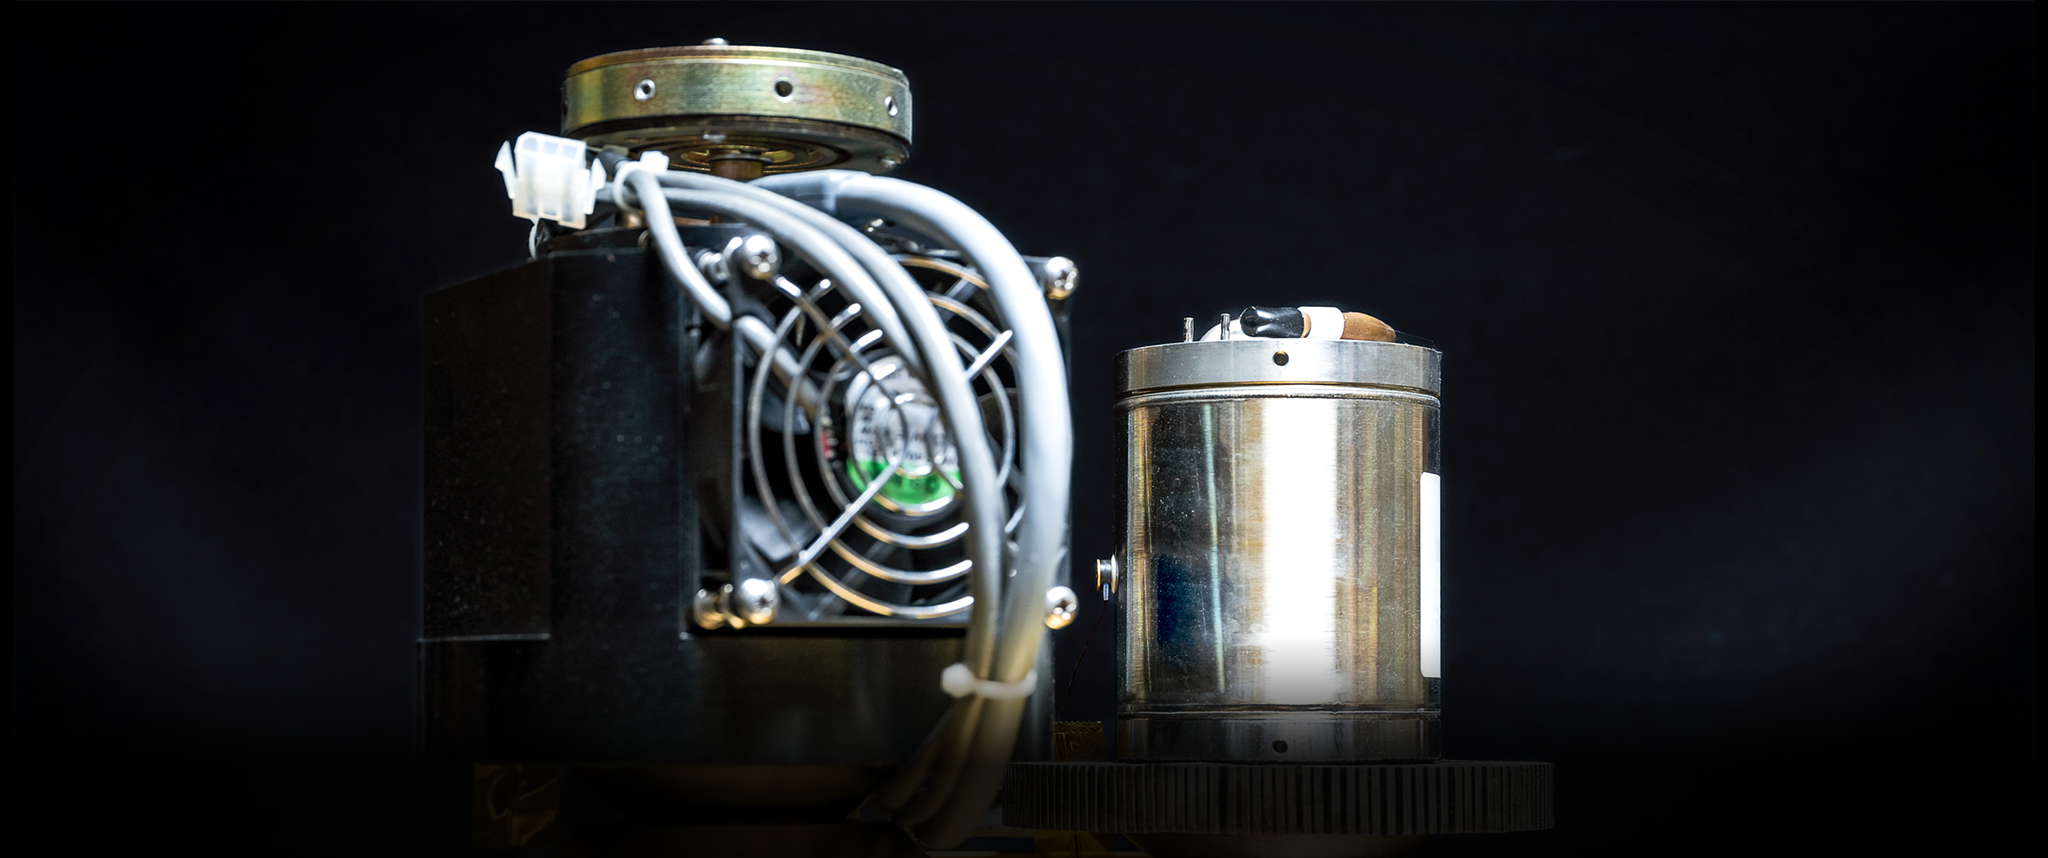 Cryocoolers are critical for the thermal management of components that enable satellites and sensors to work, and Aerospace's experts know what it takes to keep space cool.